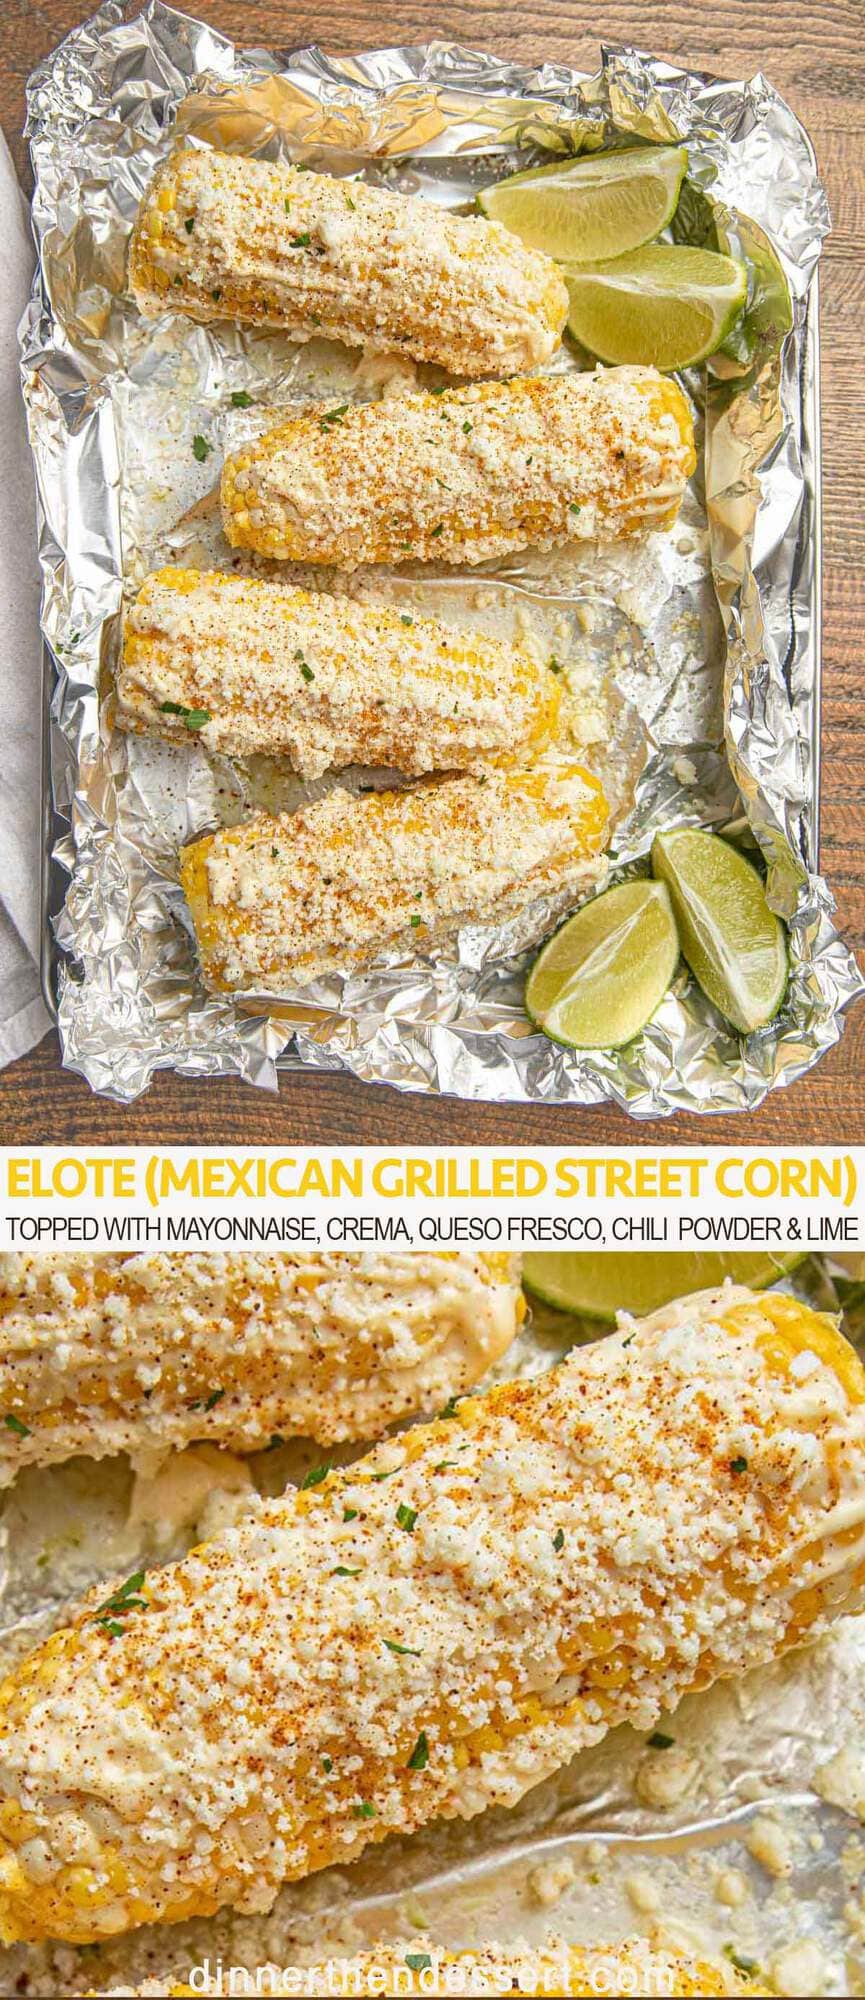 How to Make Elote (Mexican Grilled Street Corn) - Dinner, then Dessert